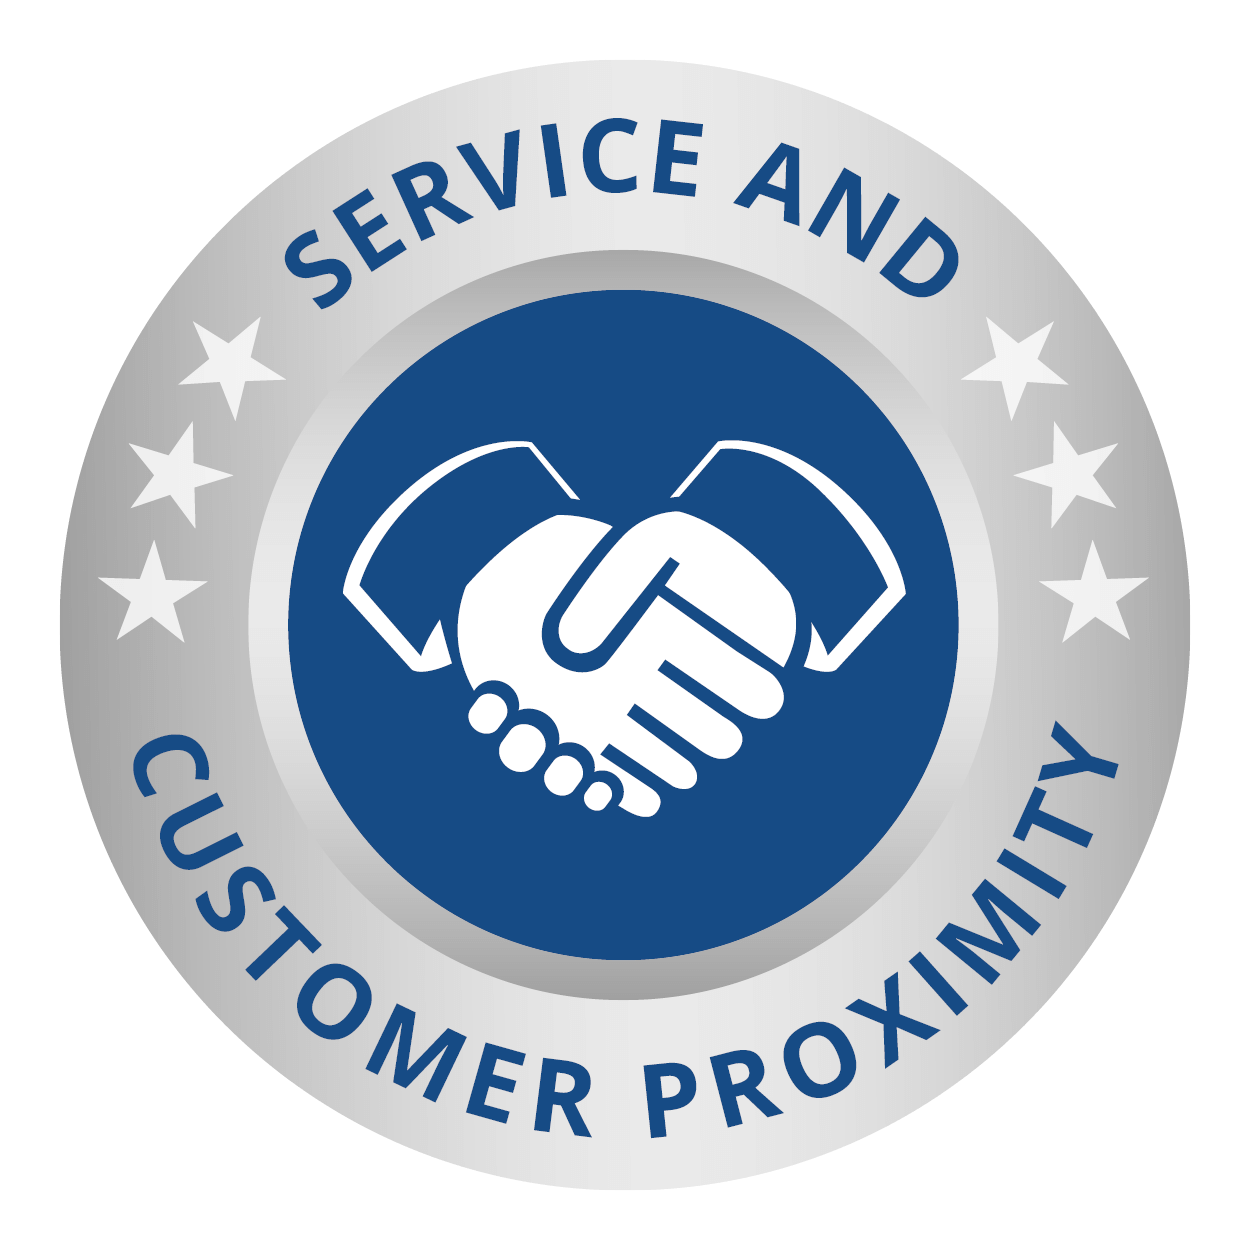 Quality seal Service and customer proximity